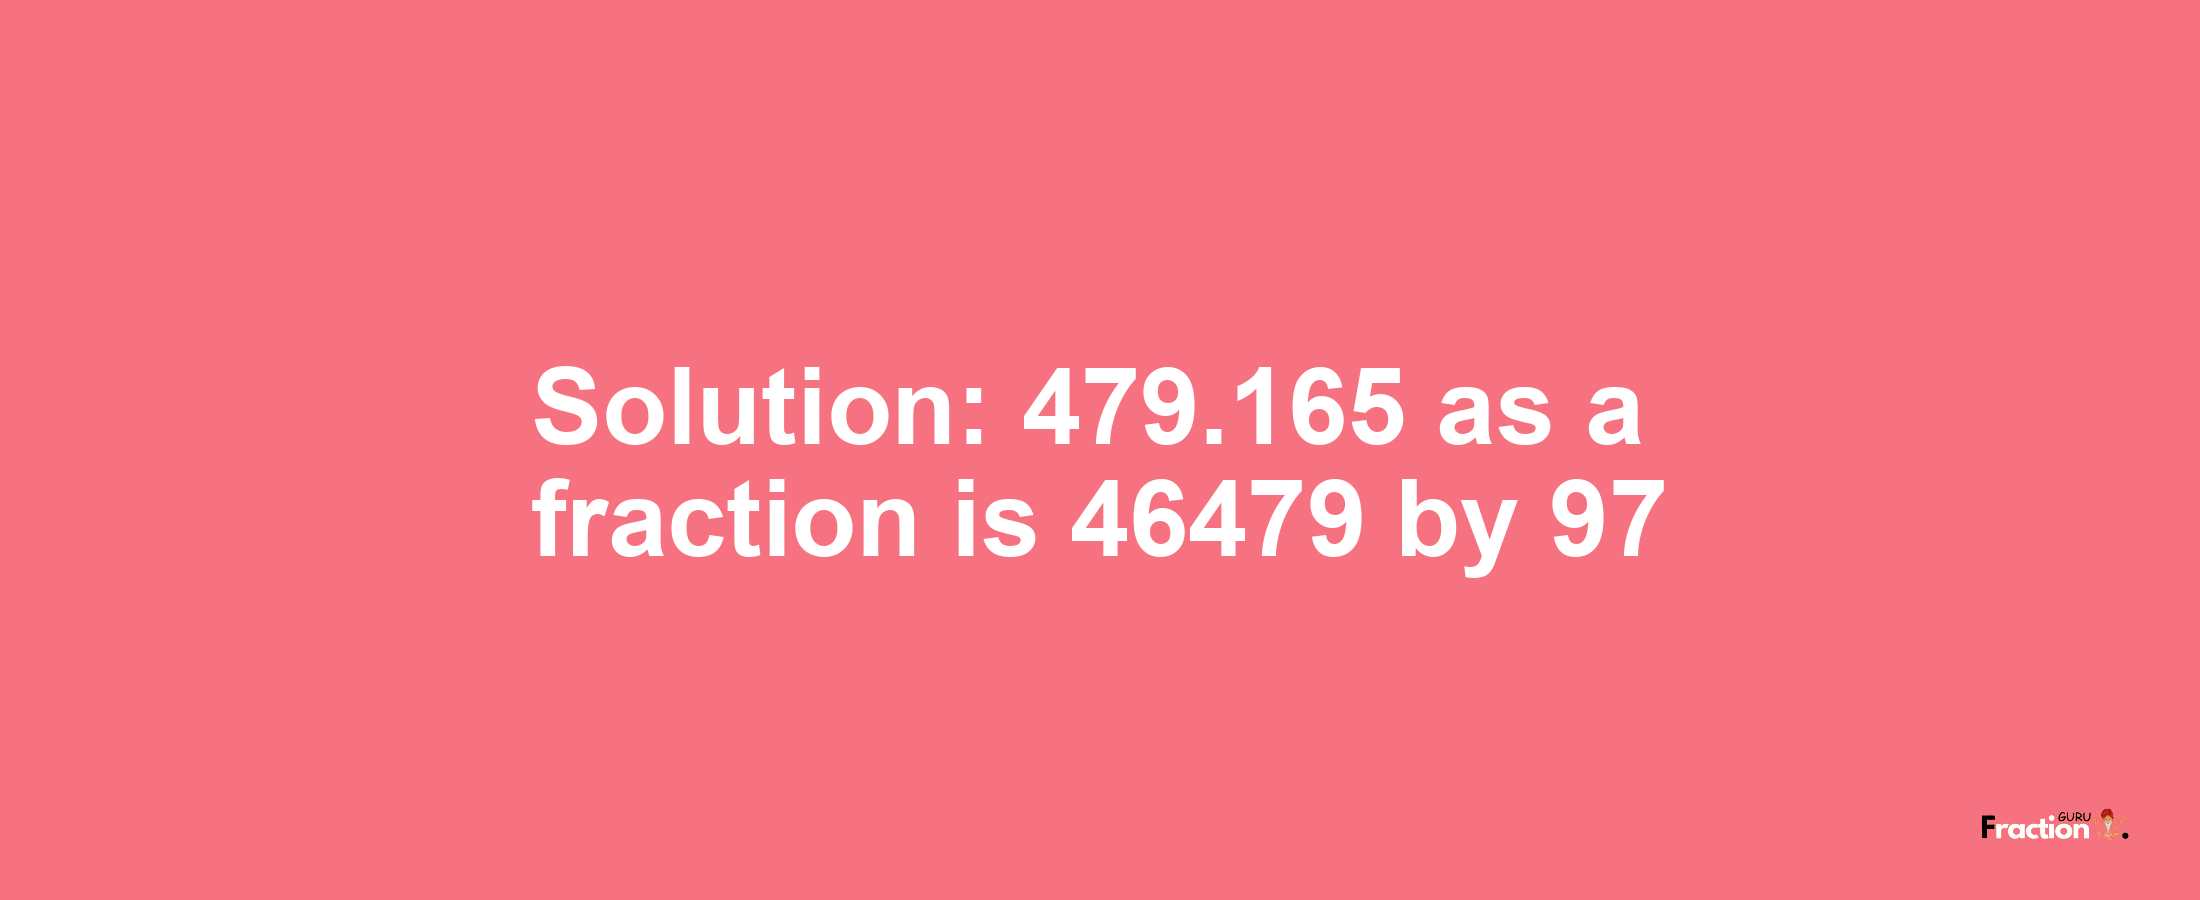 Solution:479.165 as a fraction is 46479/97